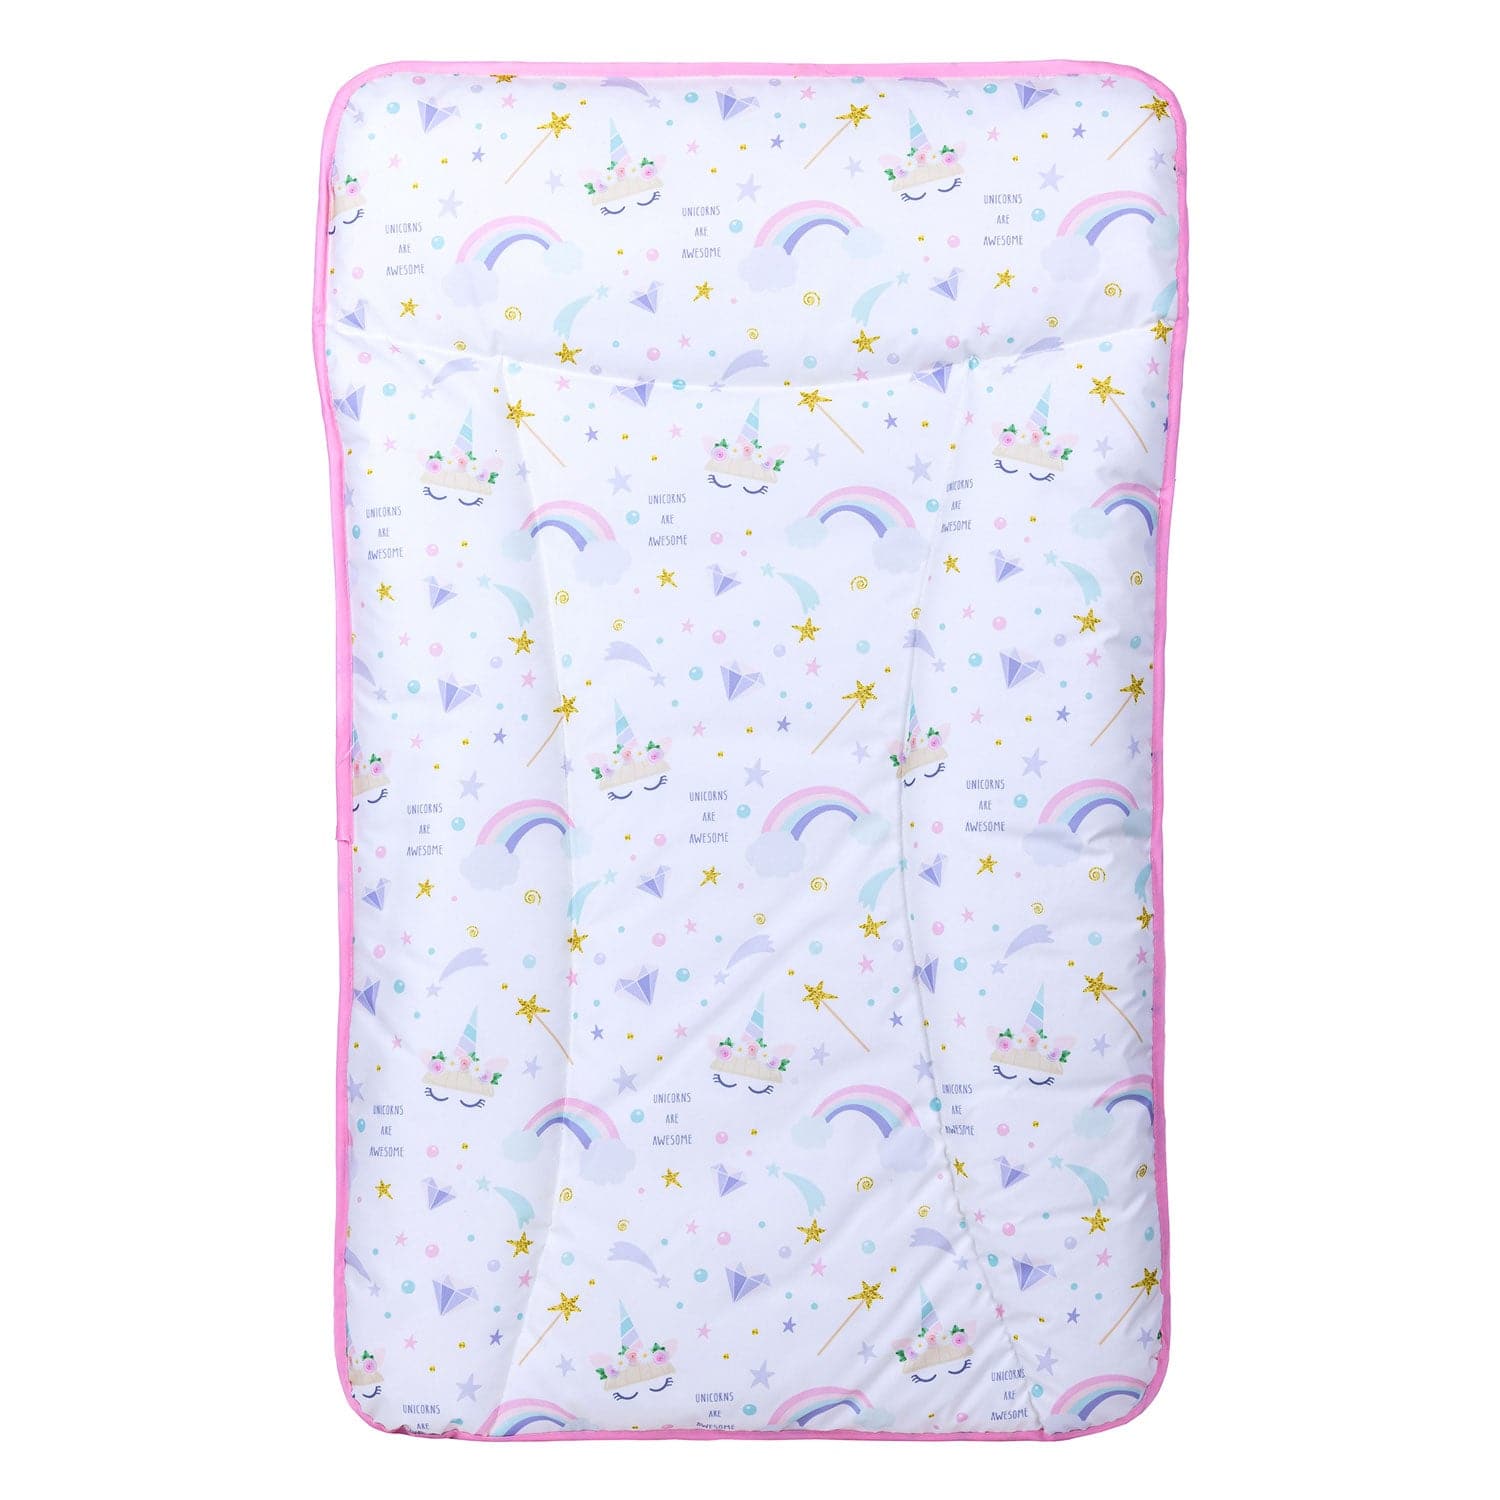 Deluxe Changing Mat - Unicorn - For Your Little One